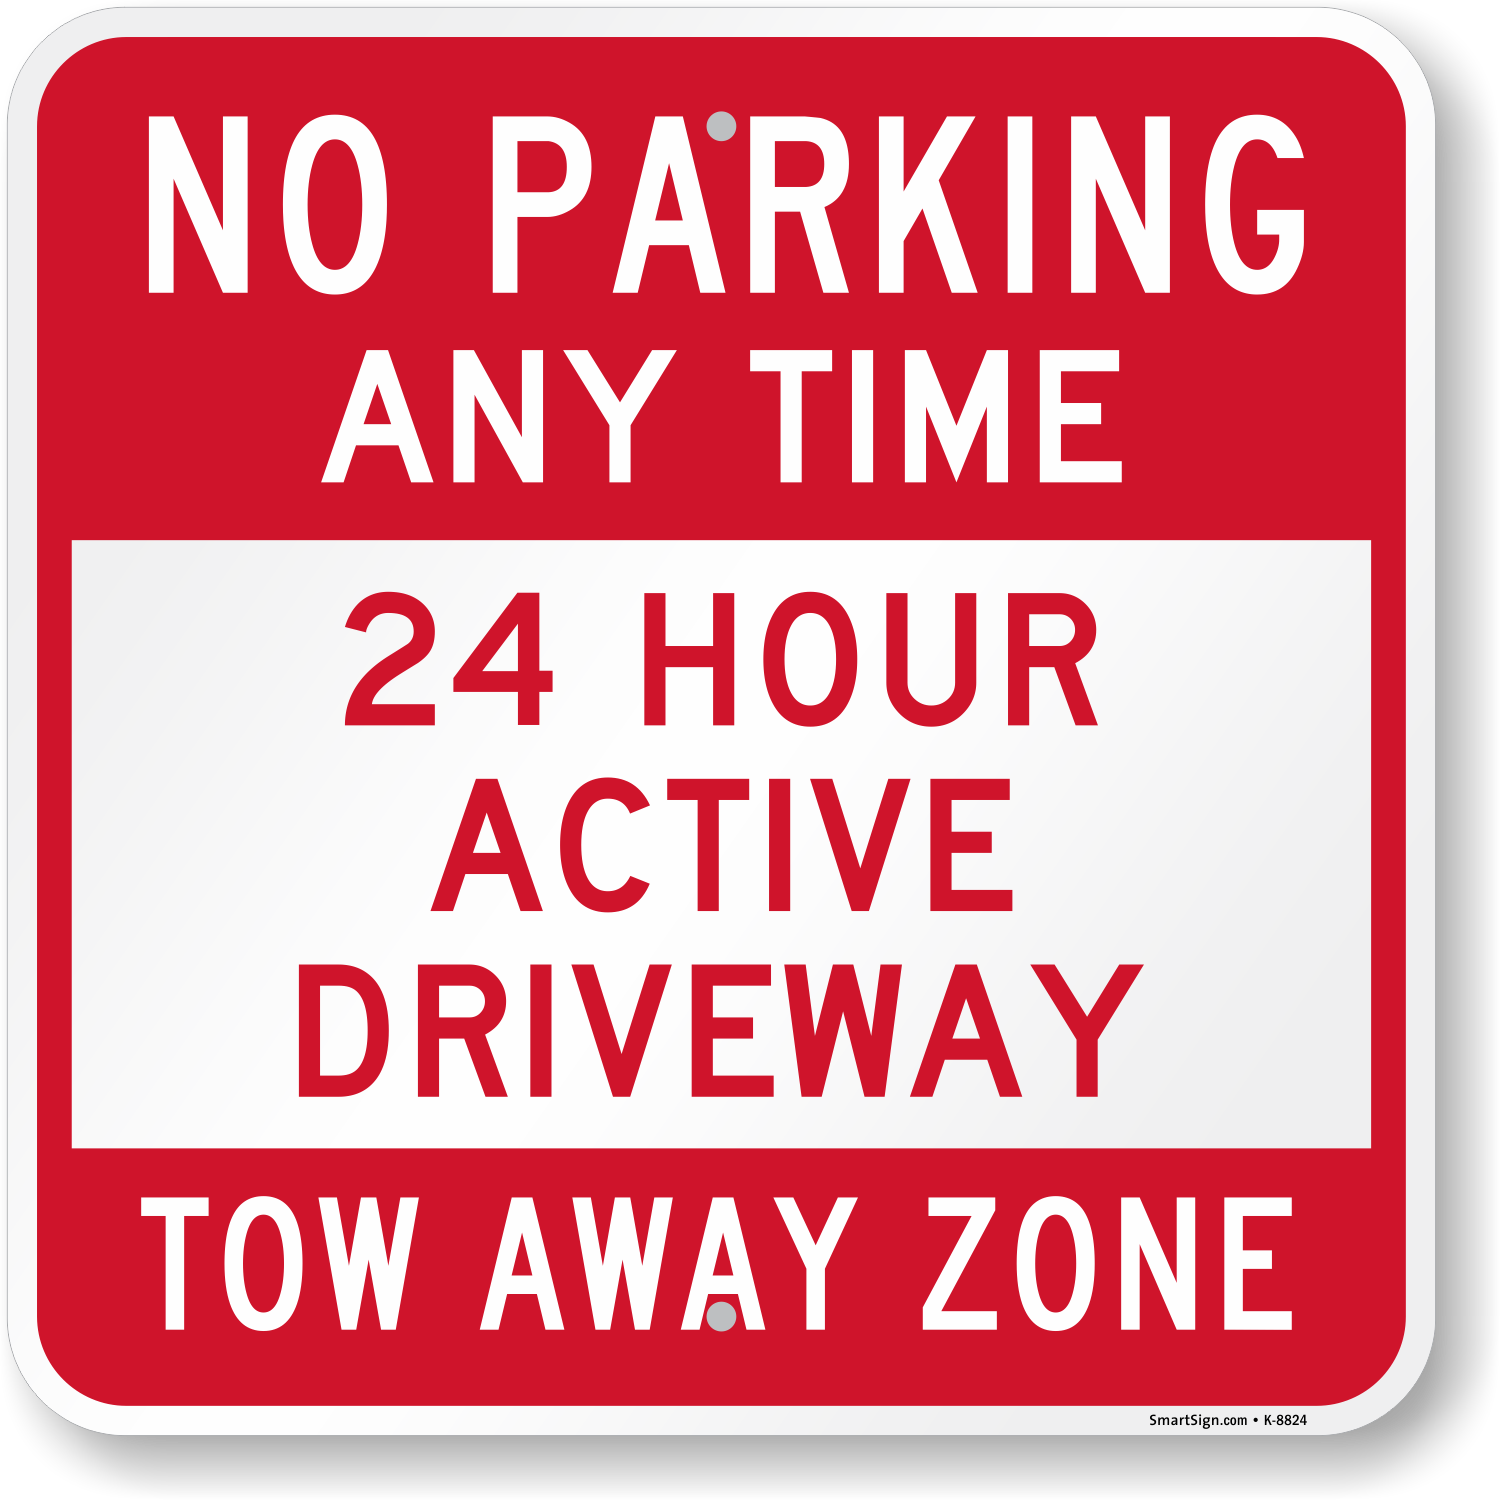 NO PARKING DRIVEWAY IN USE 24 HOURS 300 X 450MM TRAFFIC SIGN 2 X SIGNS 